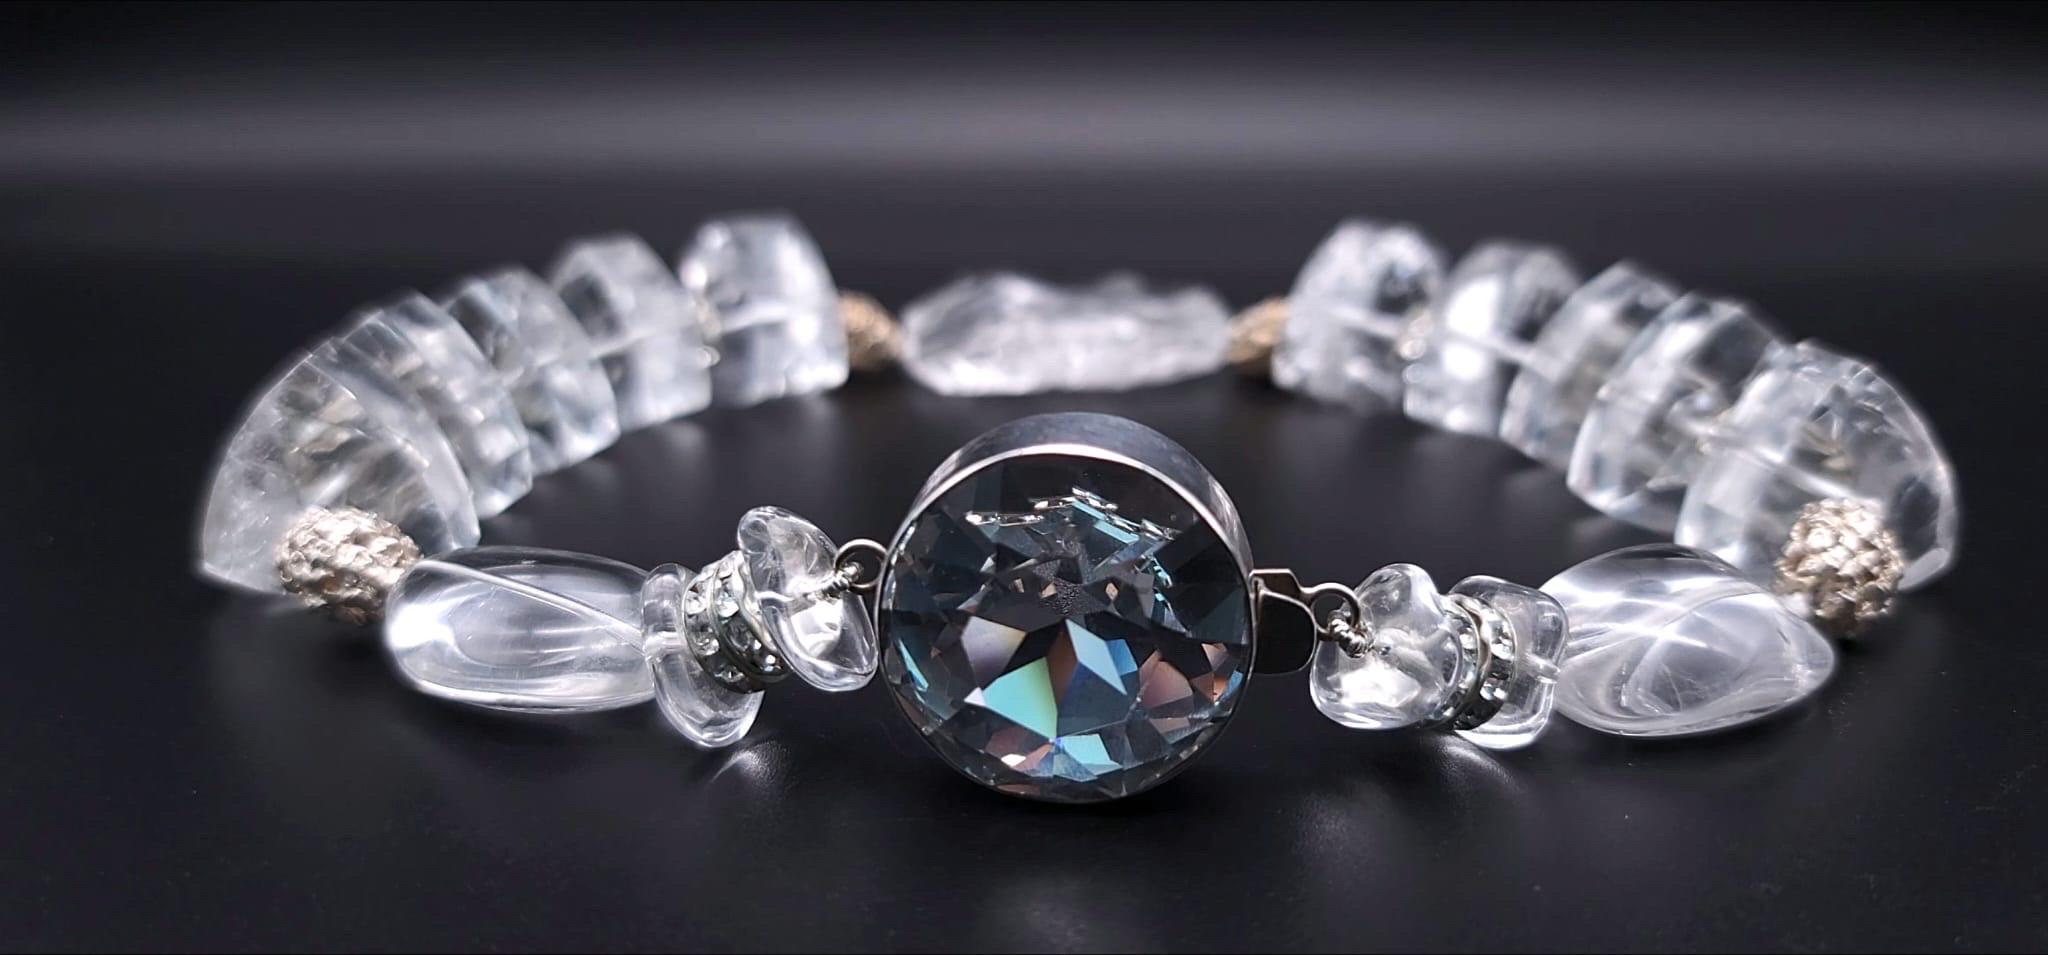 A.Jeschel Impressive Icy Crystal and Sterling Silver Necklace. For Sale 1